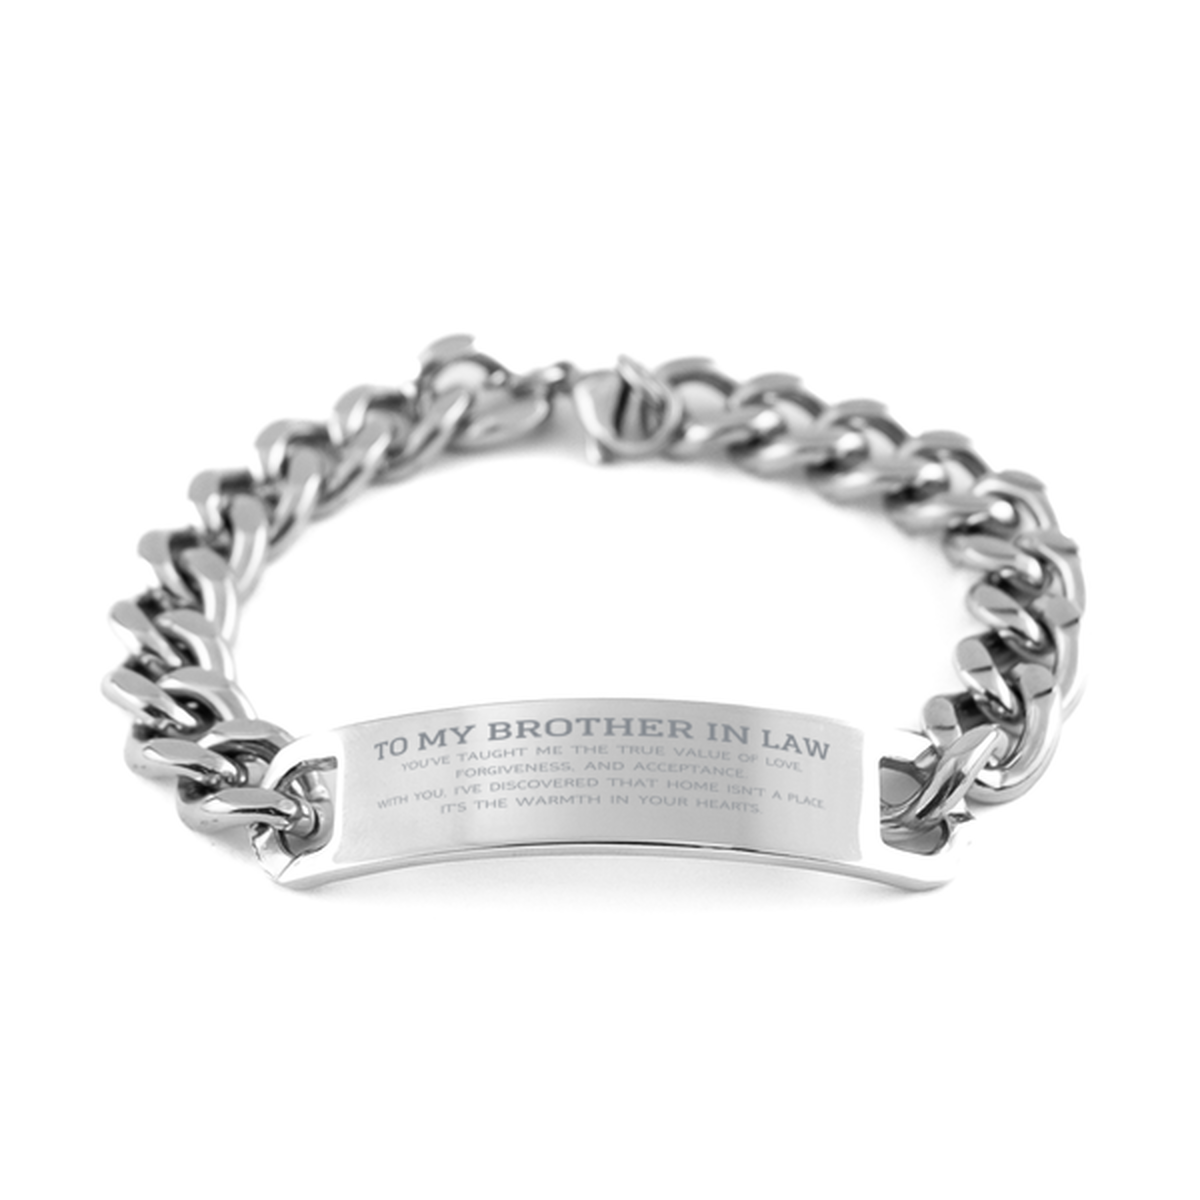 To My Brother In Law Gifts, You've taught me the true value of love, Thank You Gifts For Brother In Law, Birthday Cuban Chain Stainless Steel Bracelet For Brother In Law